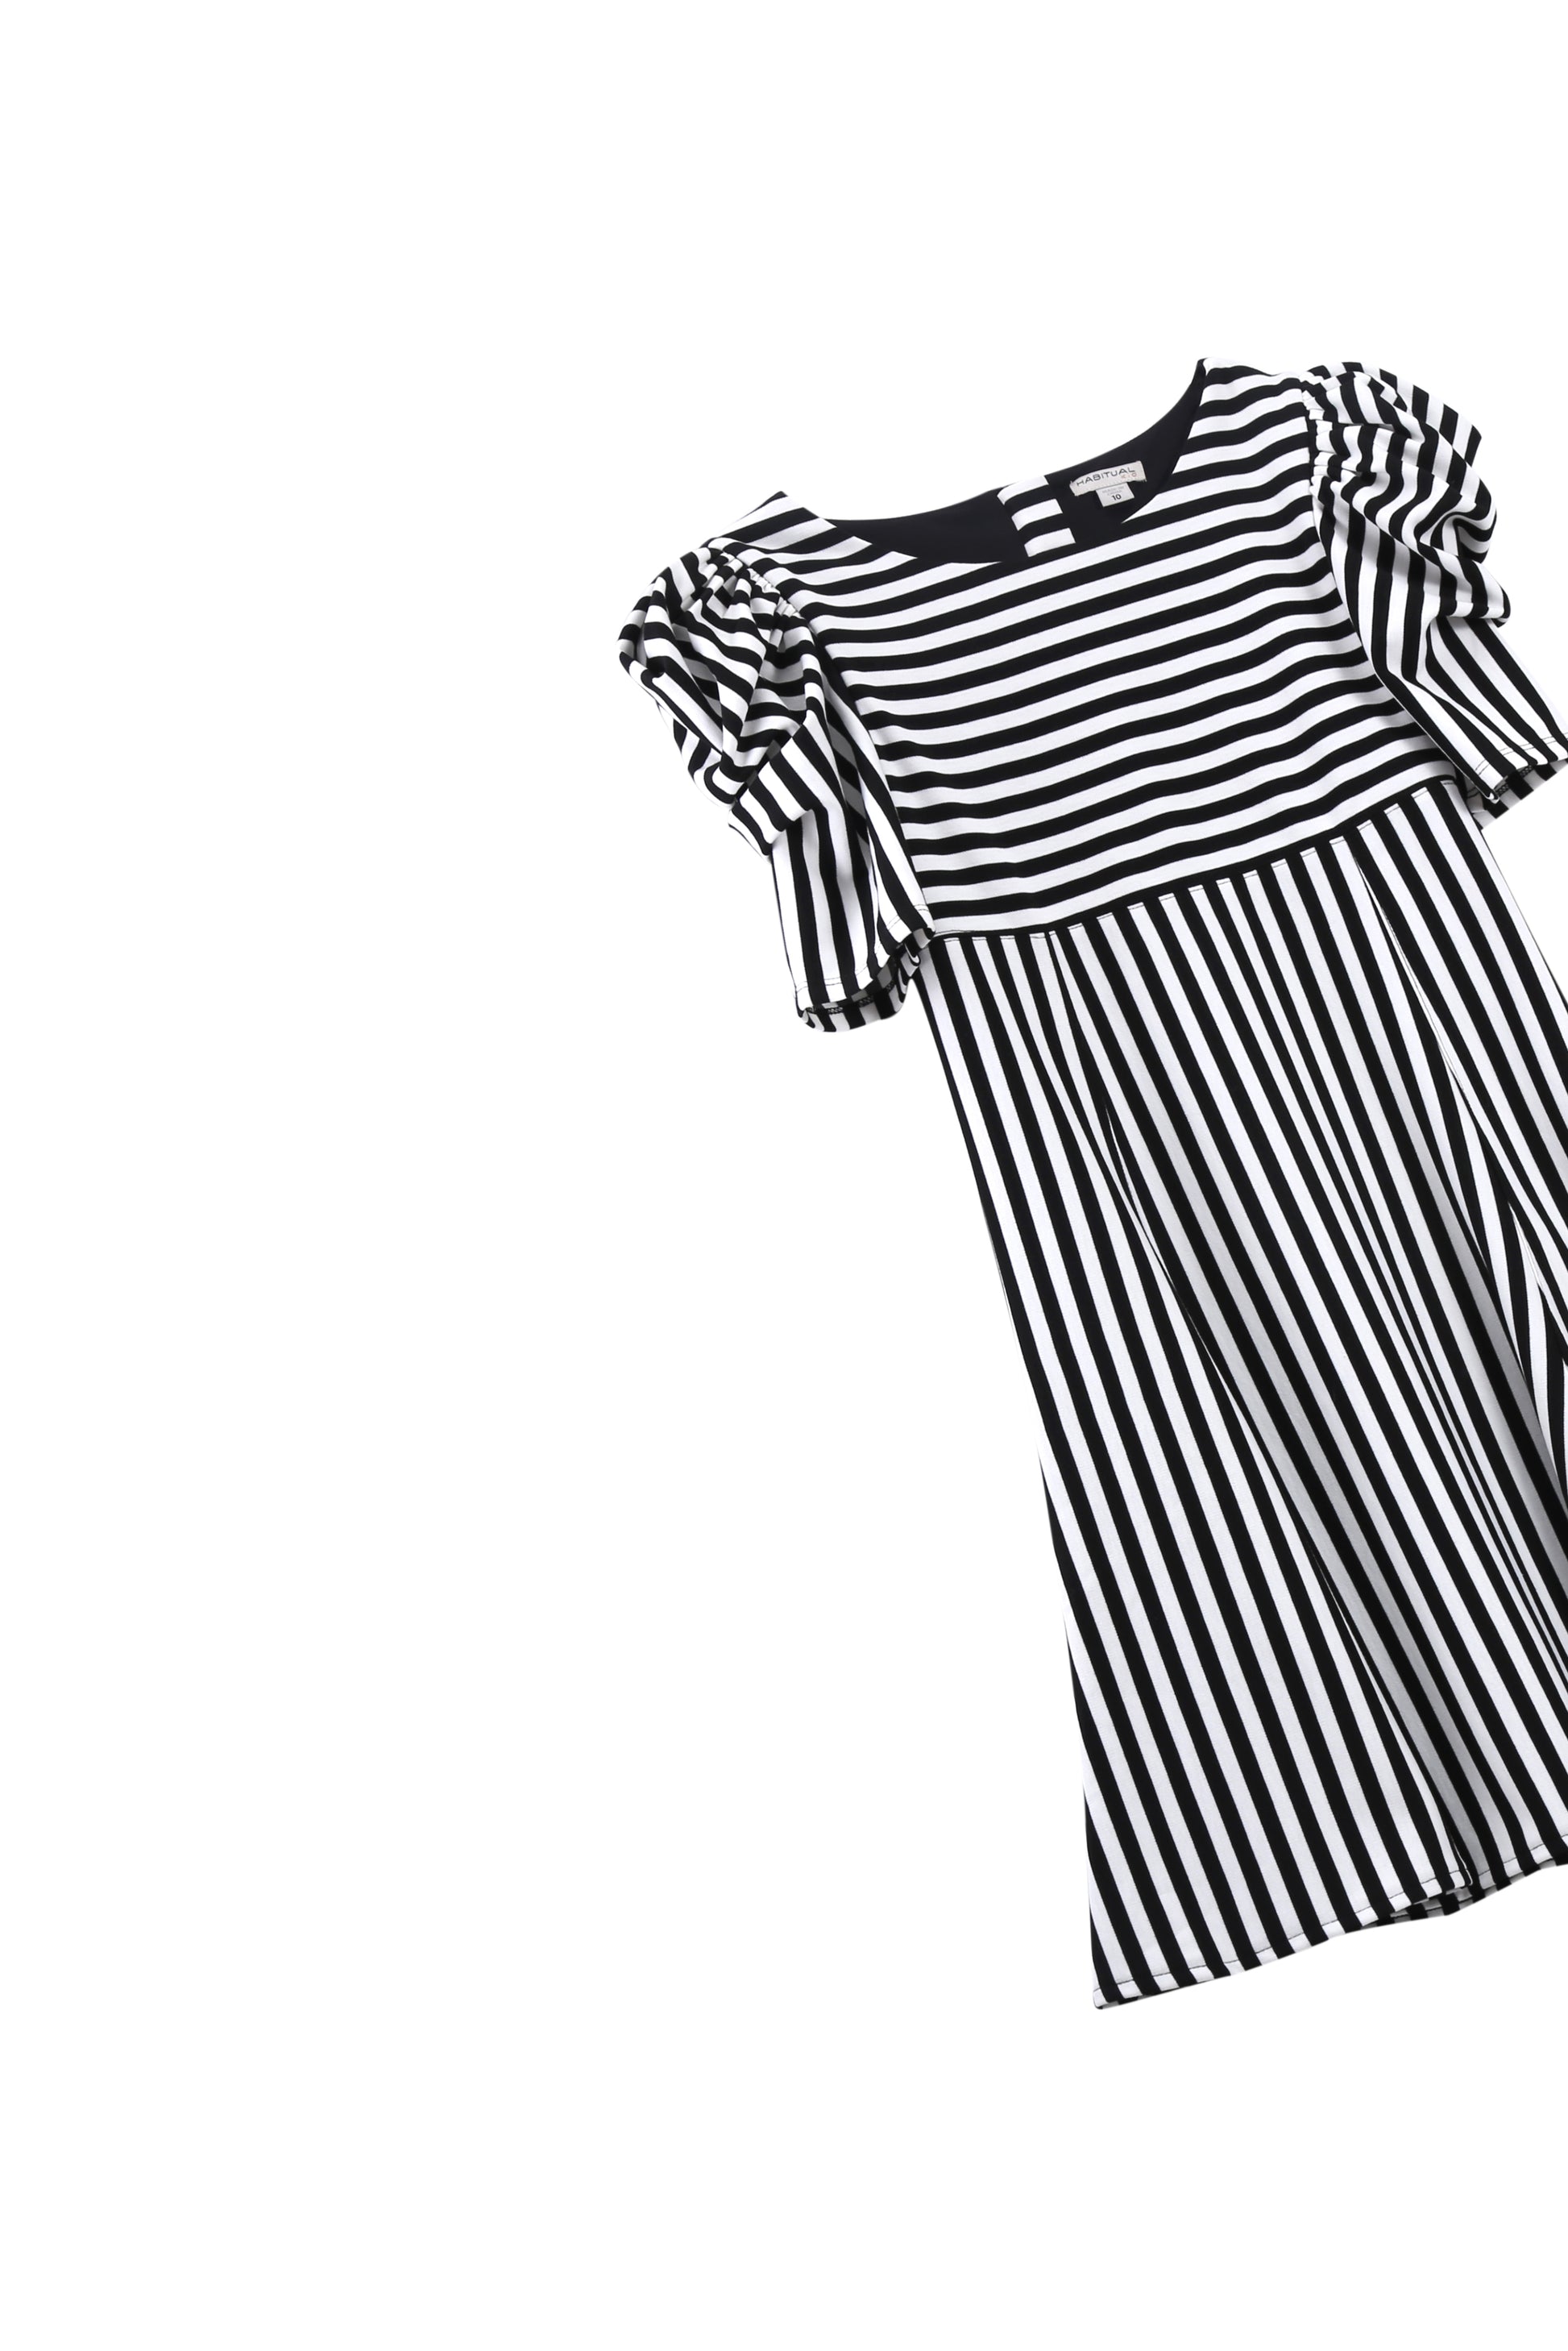 FLAT LAY OF BLACK AND WHITE STRIPED SHORT-PUFF-SLEEVE STRIPED DRESS